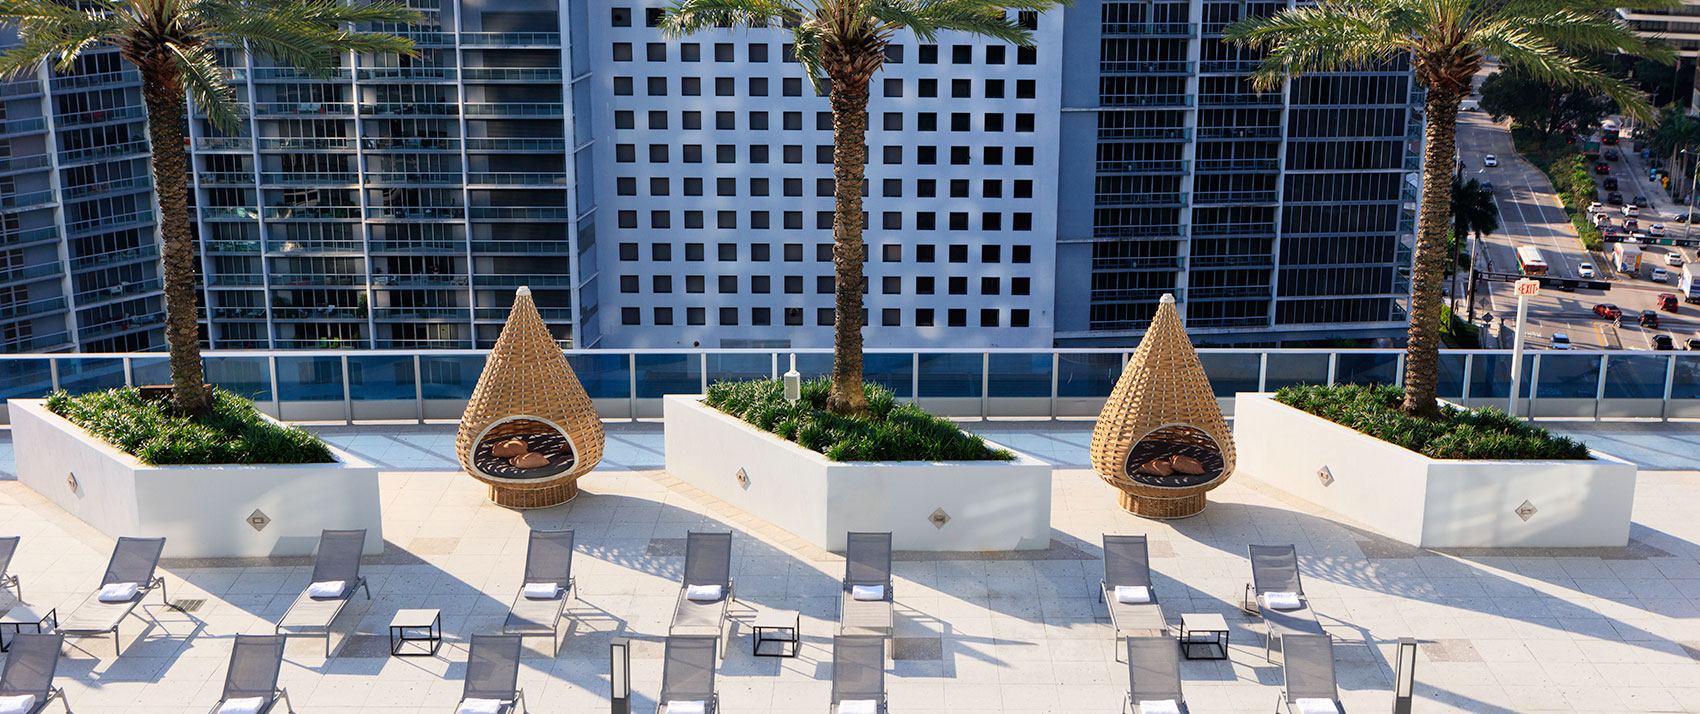 Rooftop Pool Deck with Cabanas